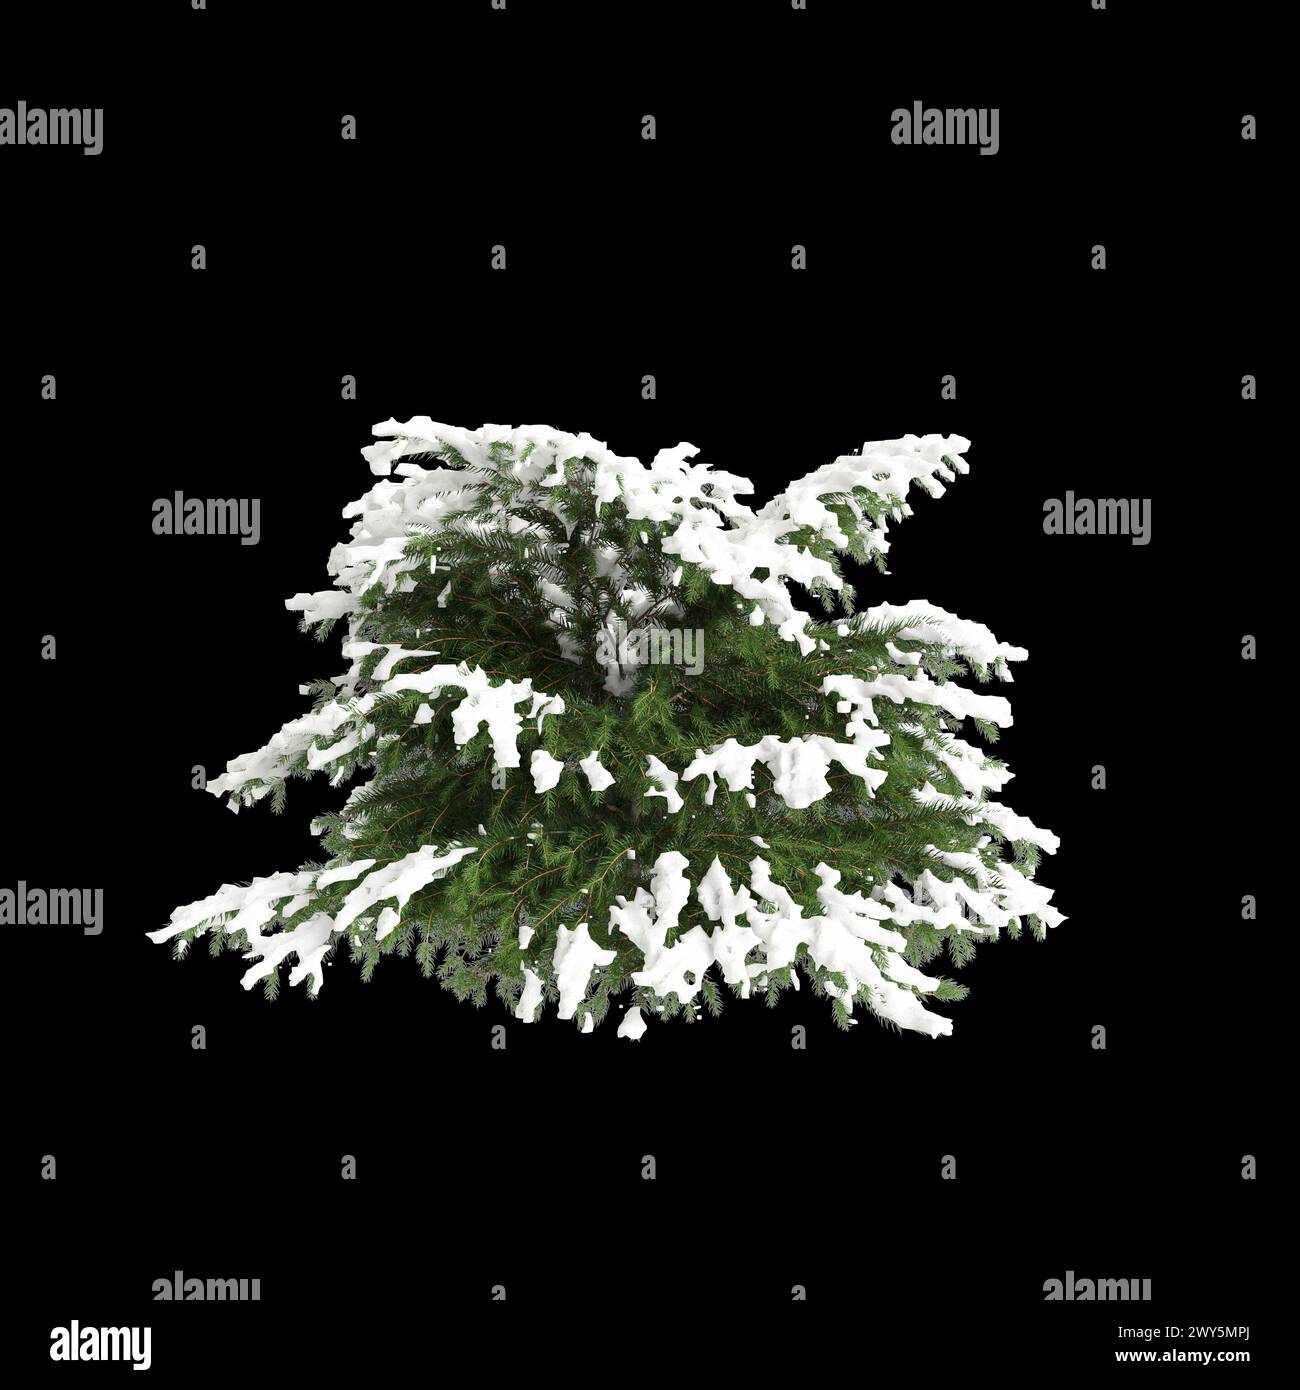 3d illustration of Picea abies Nidiformis snow covered tree isolated on black background Stock Photo